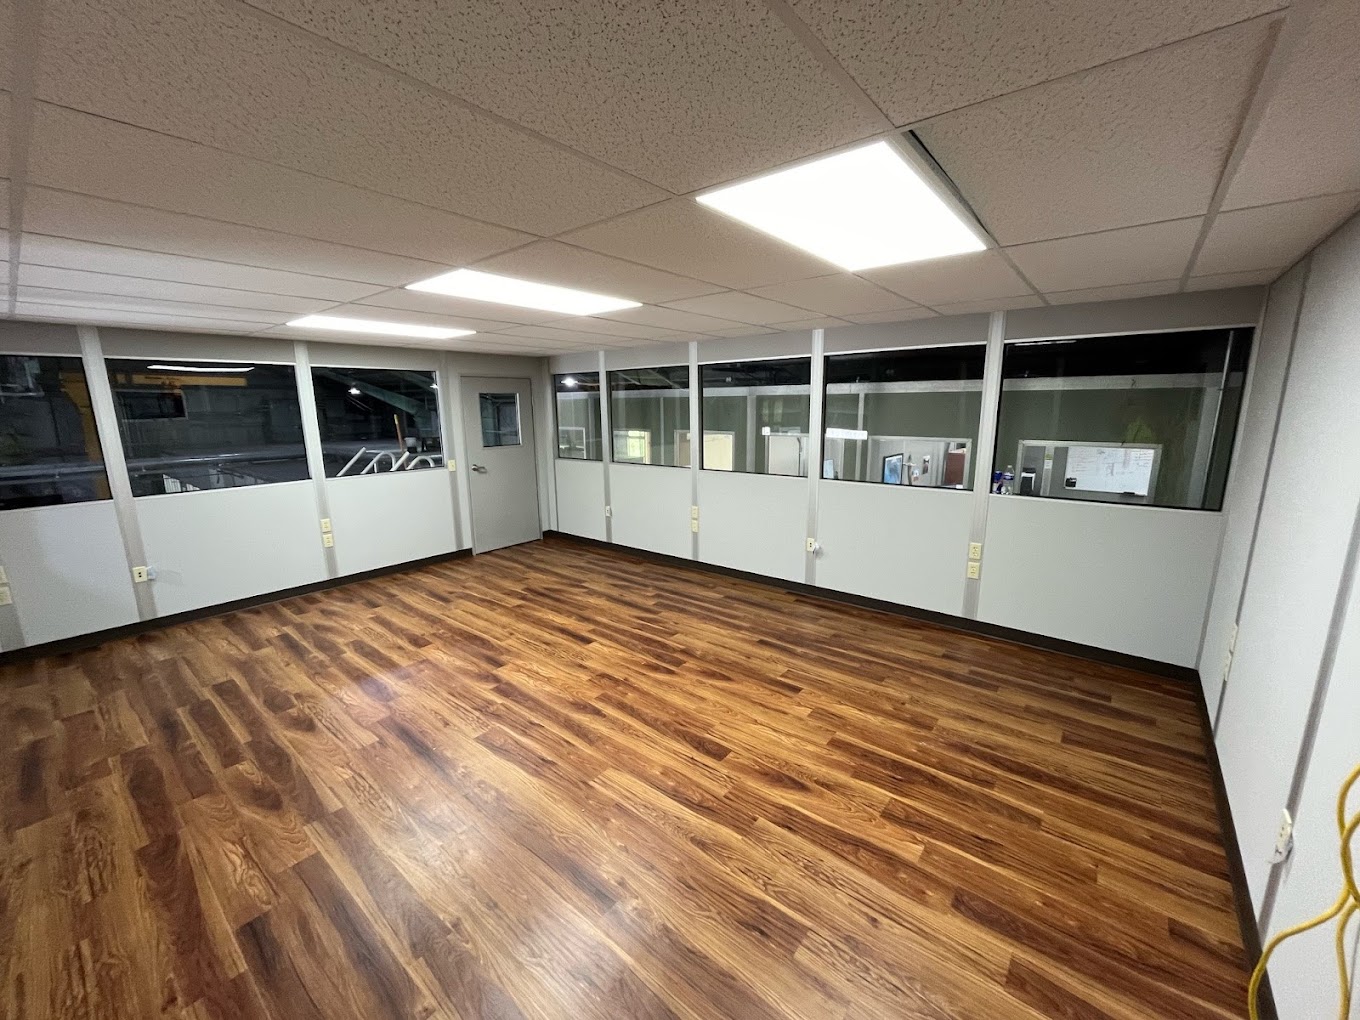 A spacious and well-lit interior of a modular building featuring wood flooring and large windows.